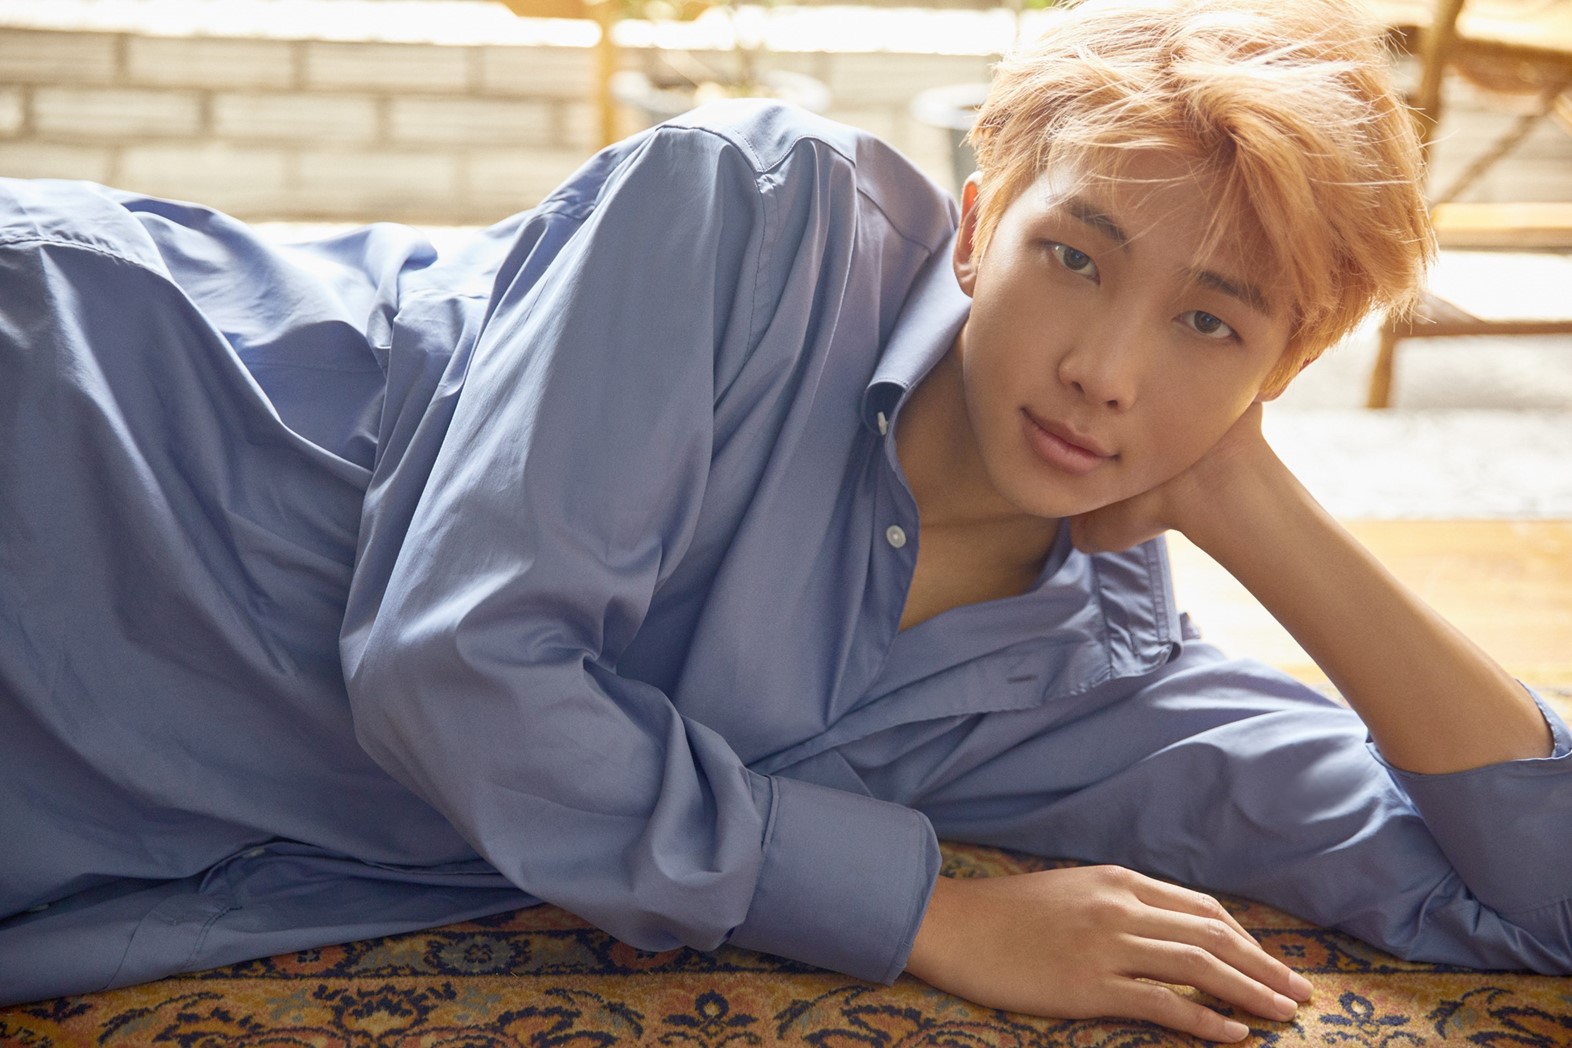 BTS's RM shares his thoughts on the 'K-label' and says the biggest